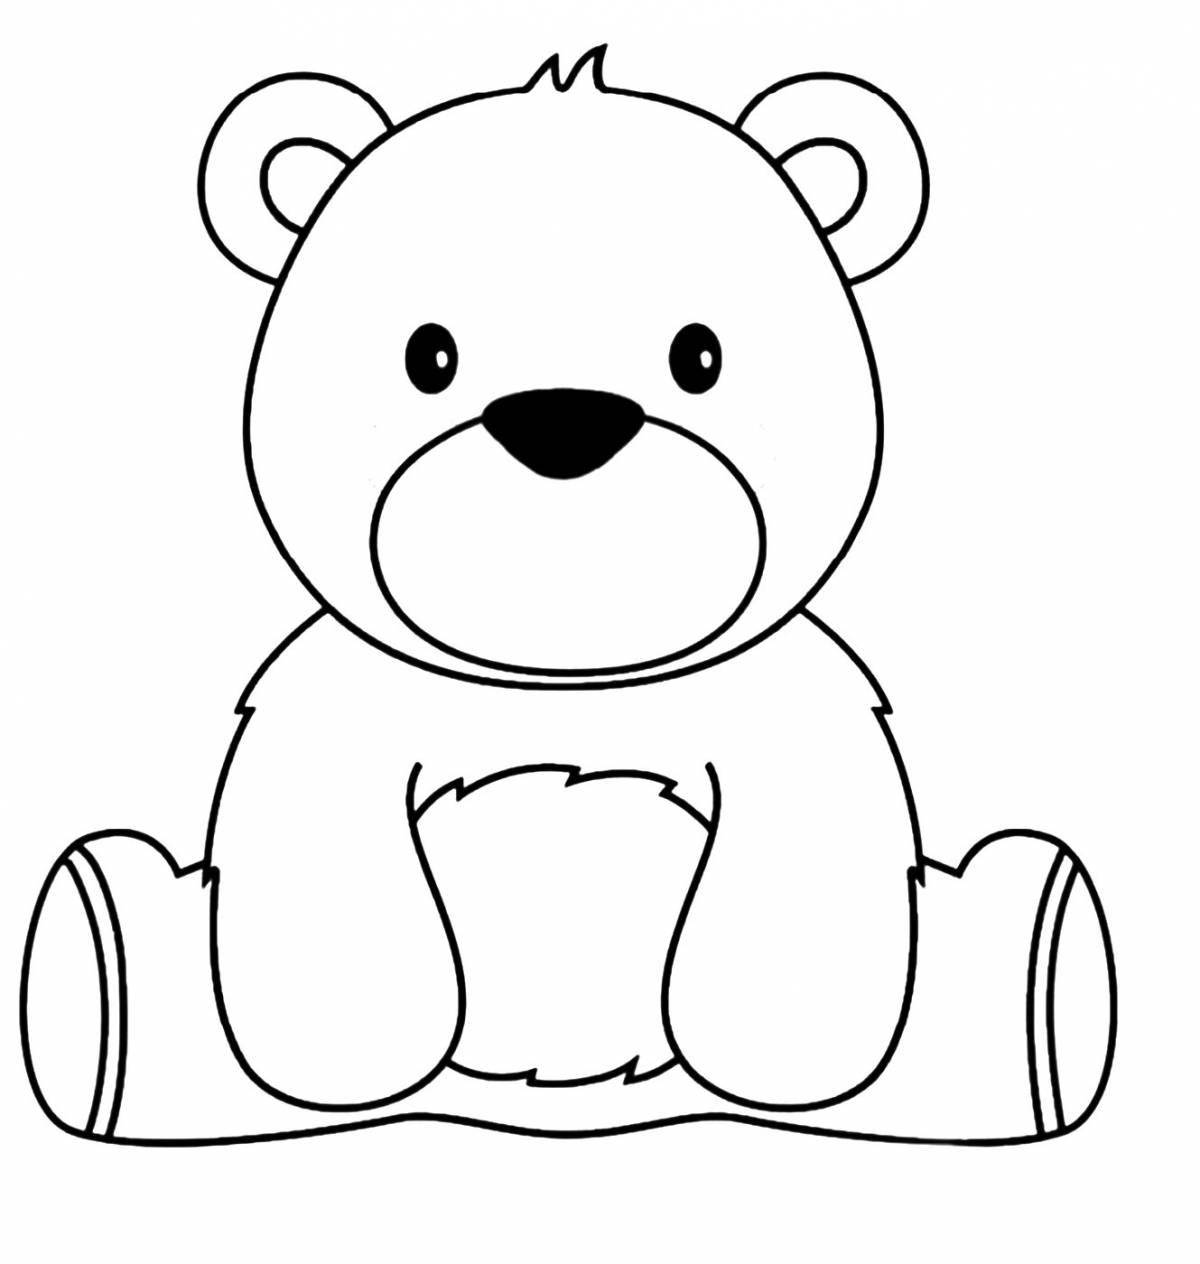 Excited Teddy Bear coloring book for kids